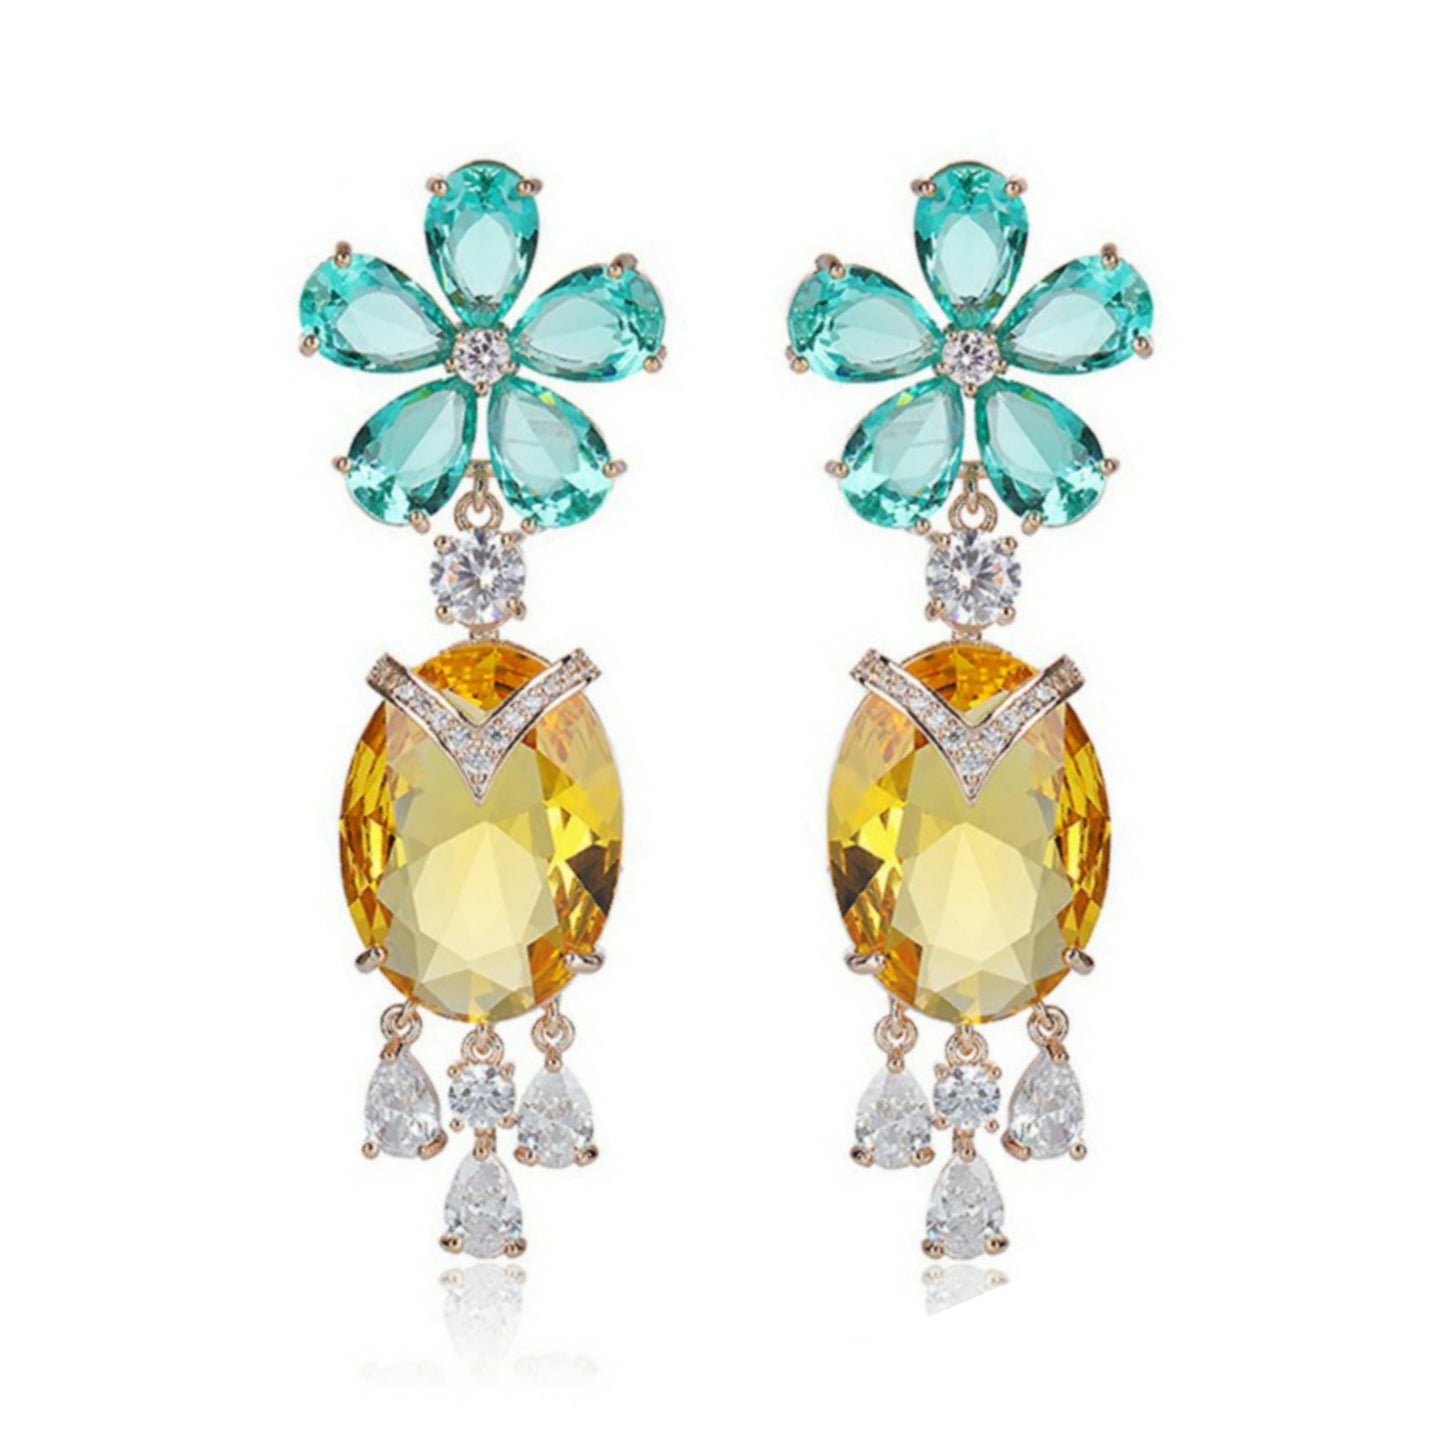 Graceful Blue Crystal Flower with Yellow Drops Earring